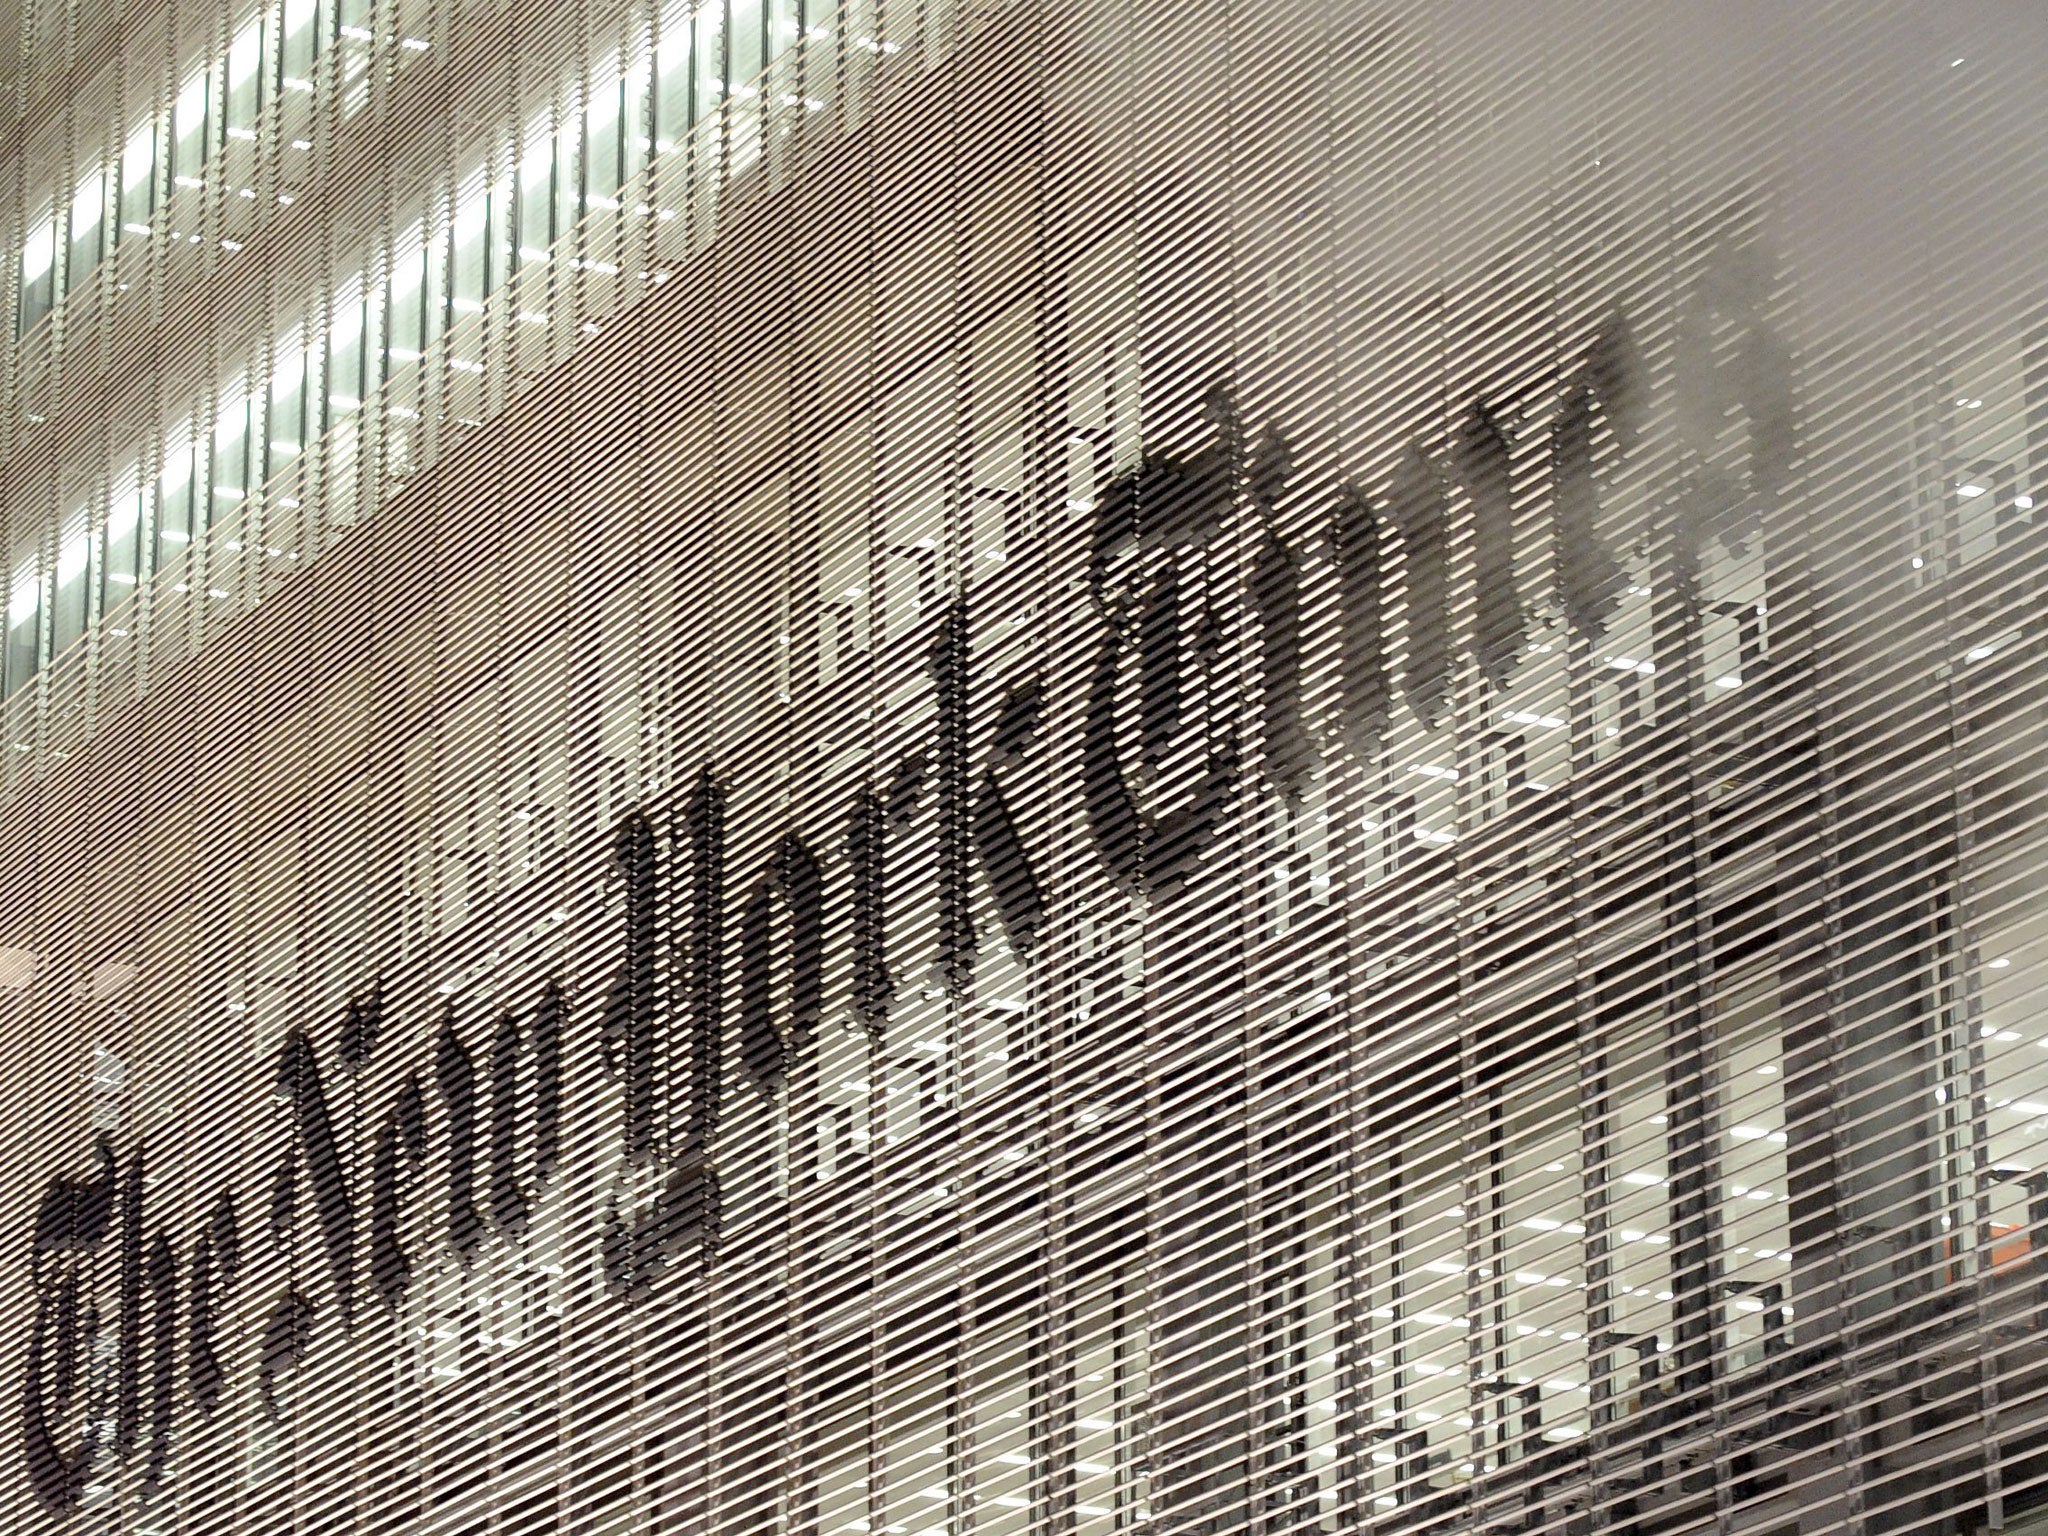 Readers who tried to click on the New York Times' website got nothing but error messages on Tuesday afternoon